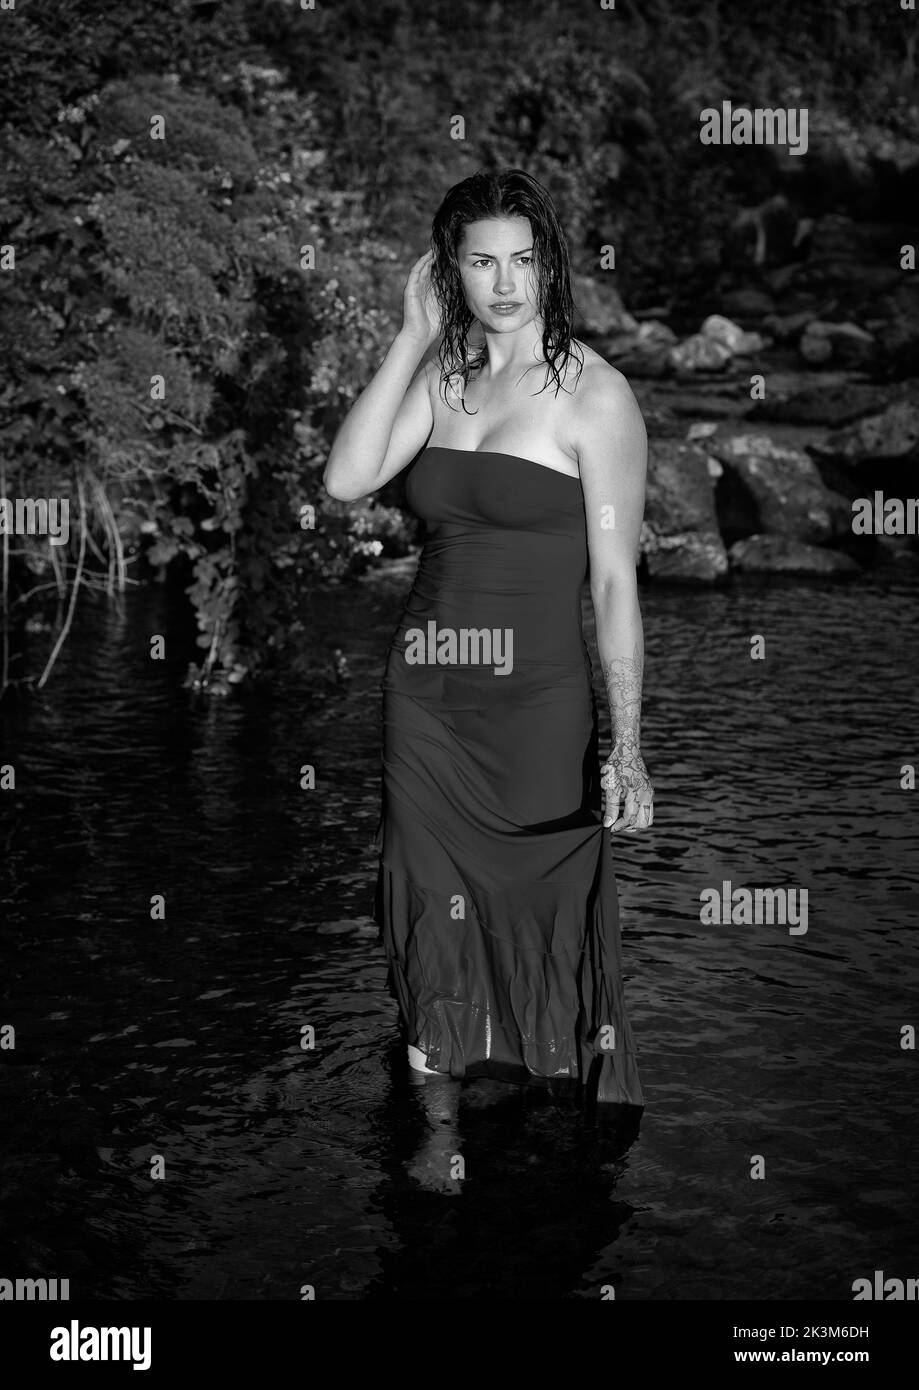 A beautiful woman standing in water in black and white Stock Photo